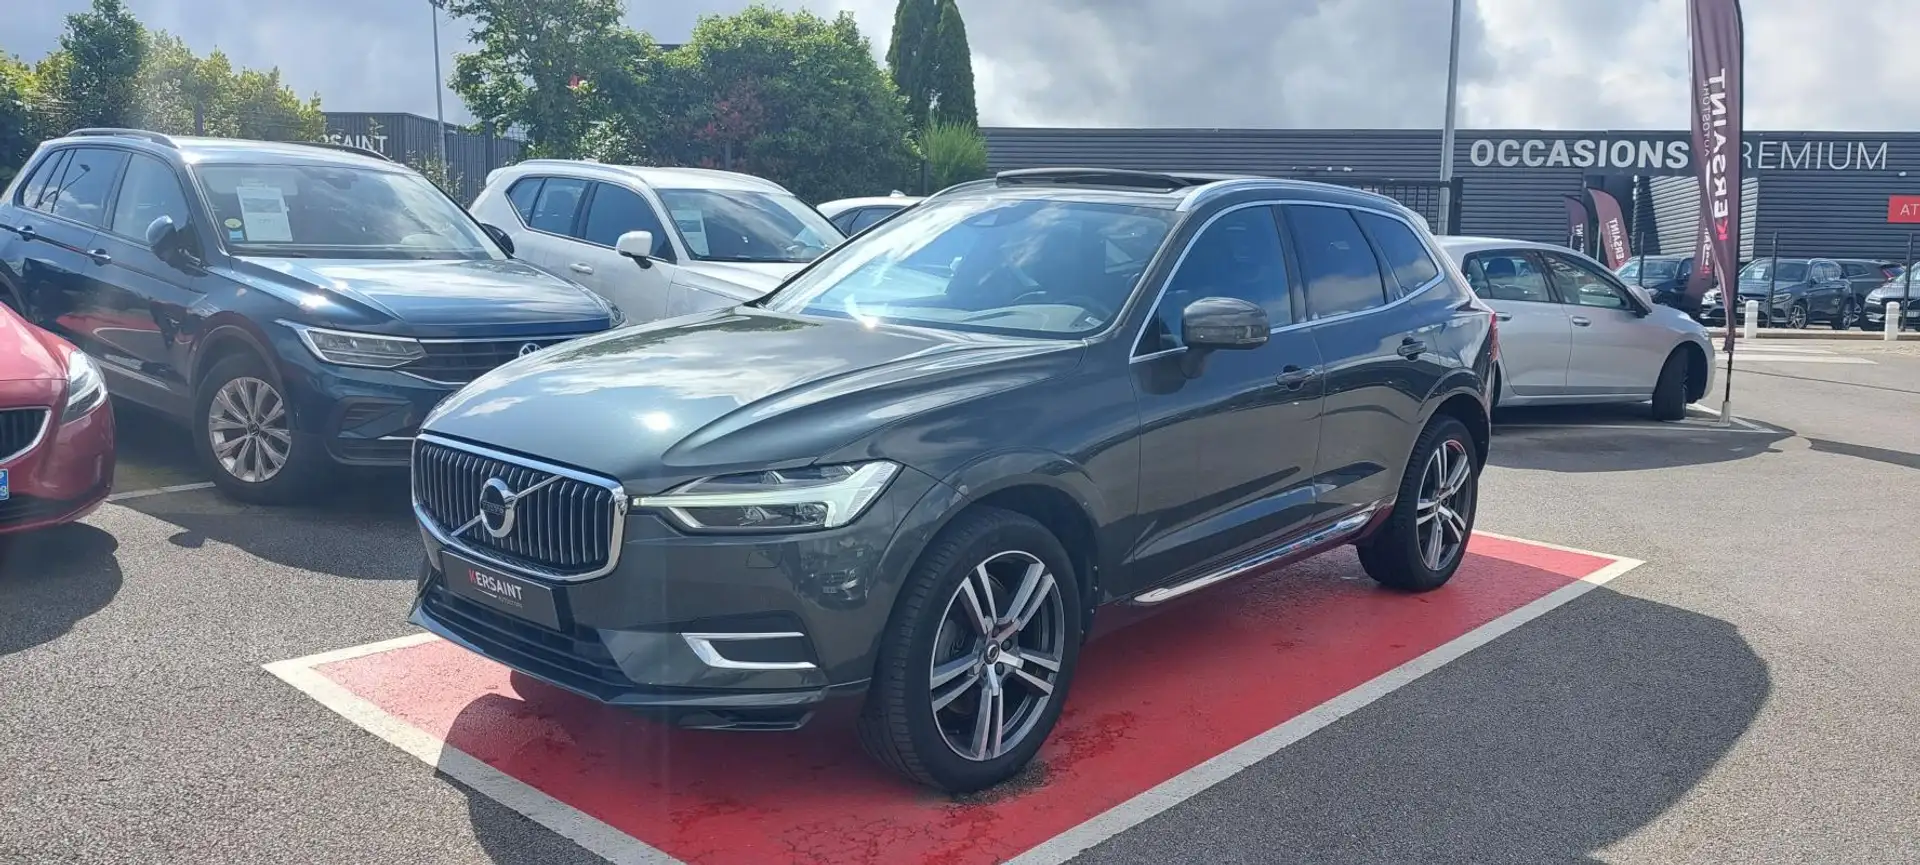 Volvo XC60 BUSINESS D5 AWD 235 CH GEATRONIC8 INSCRIPTION LUXE - 1